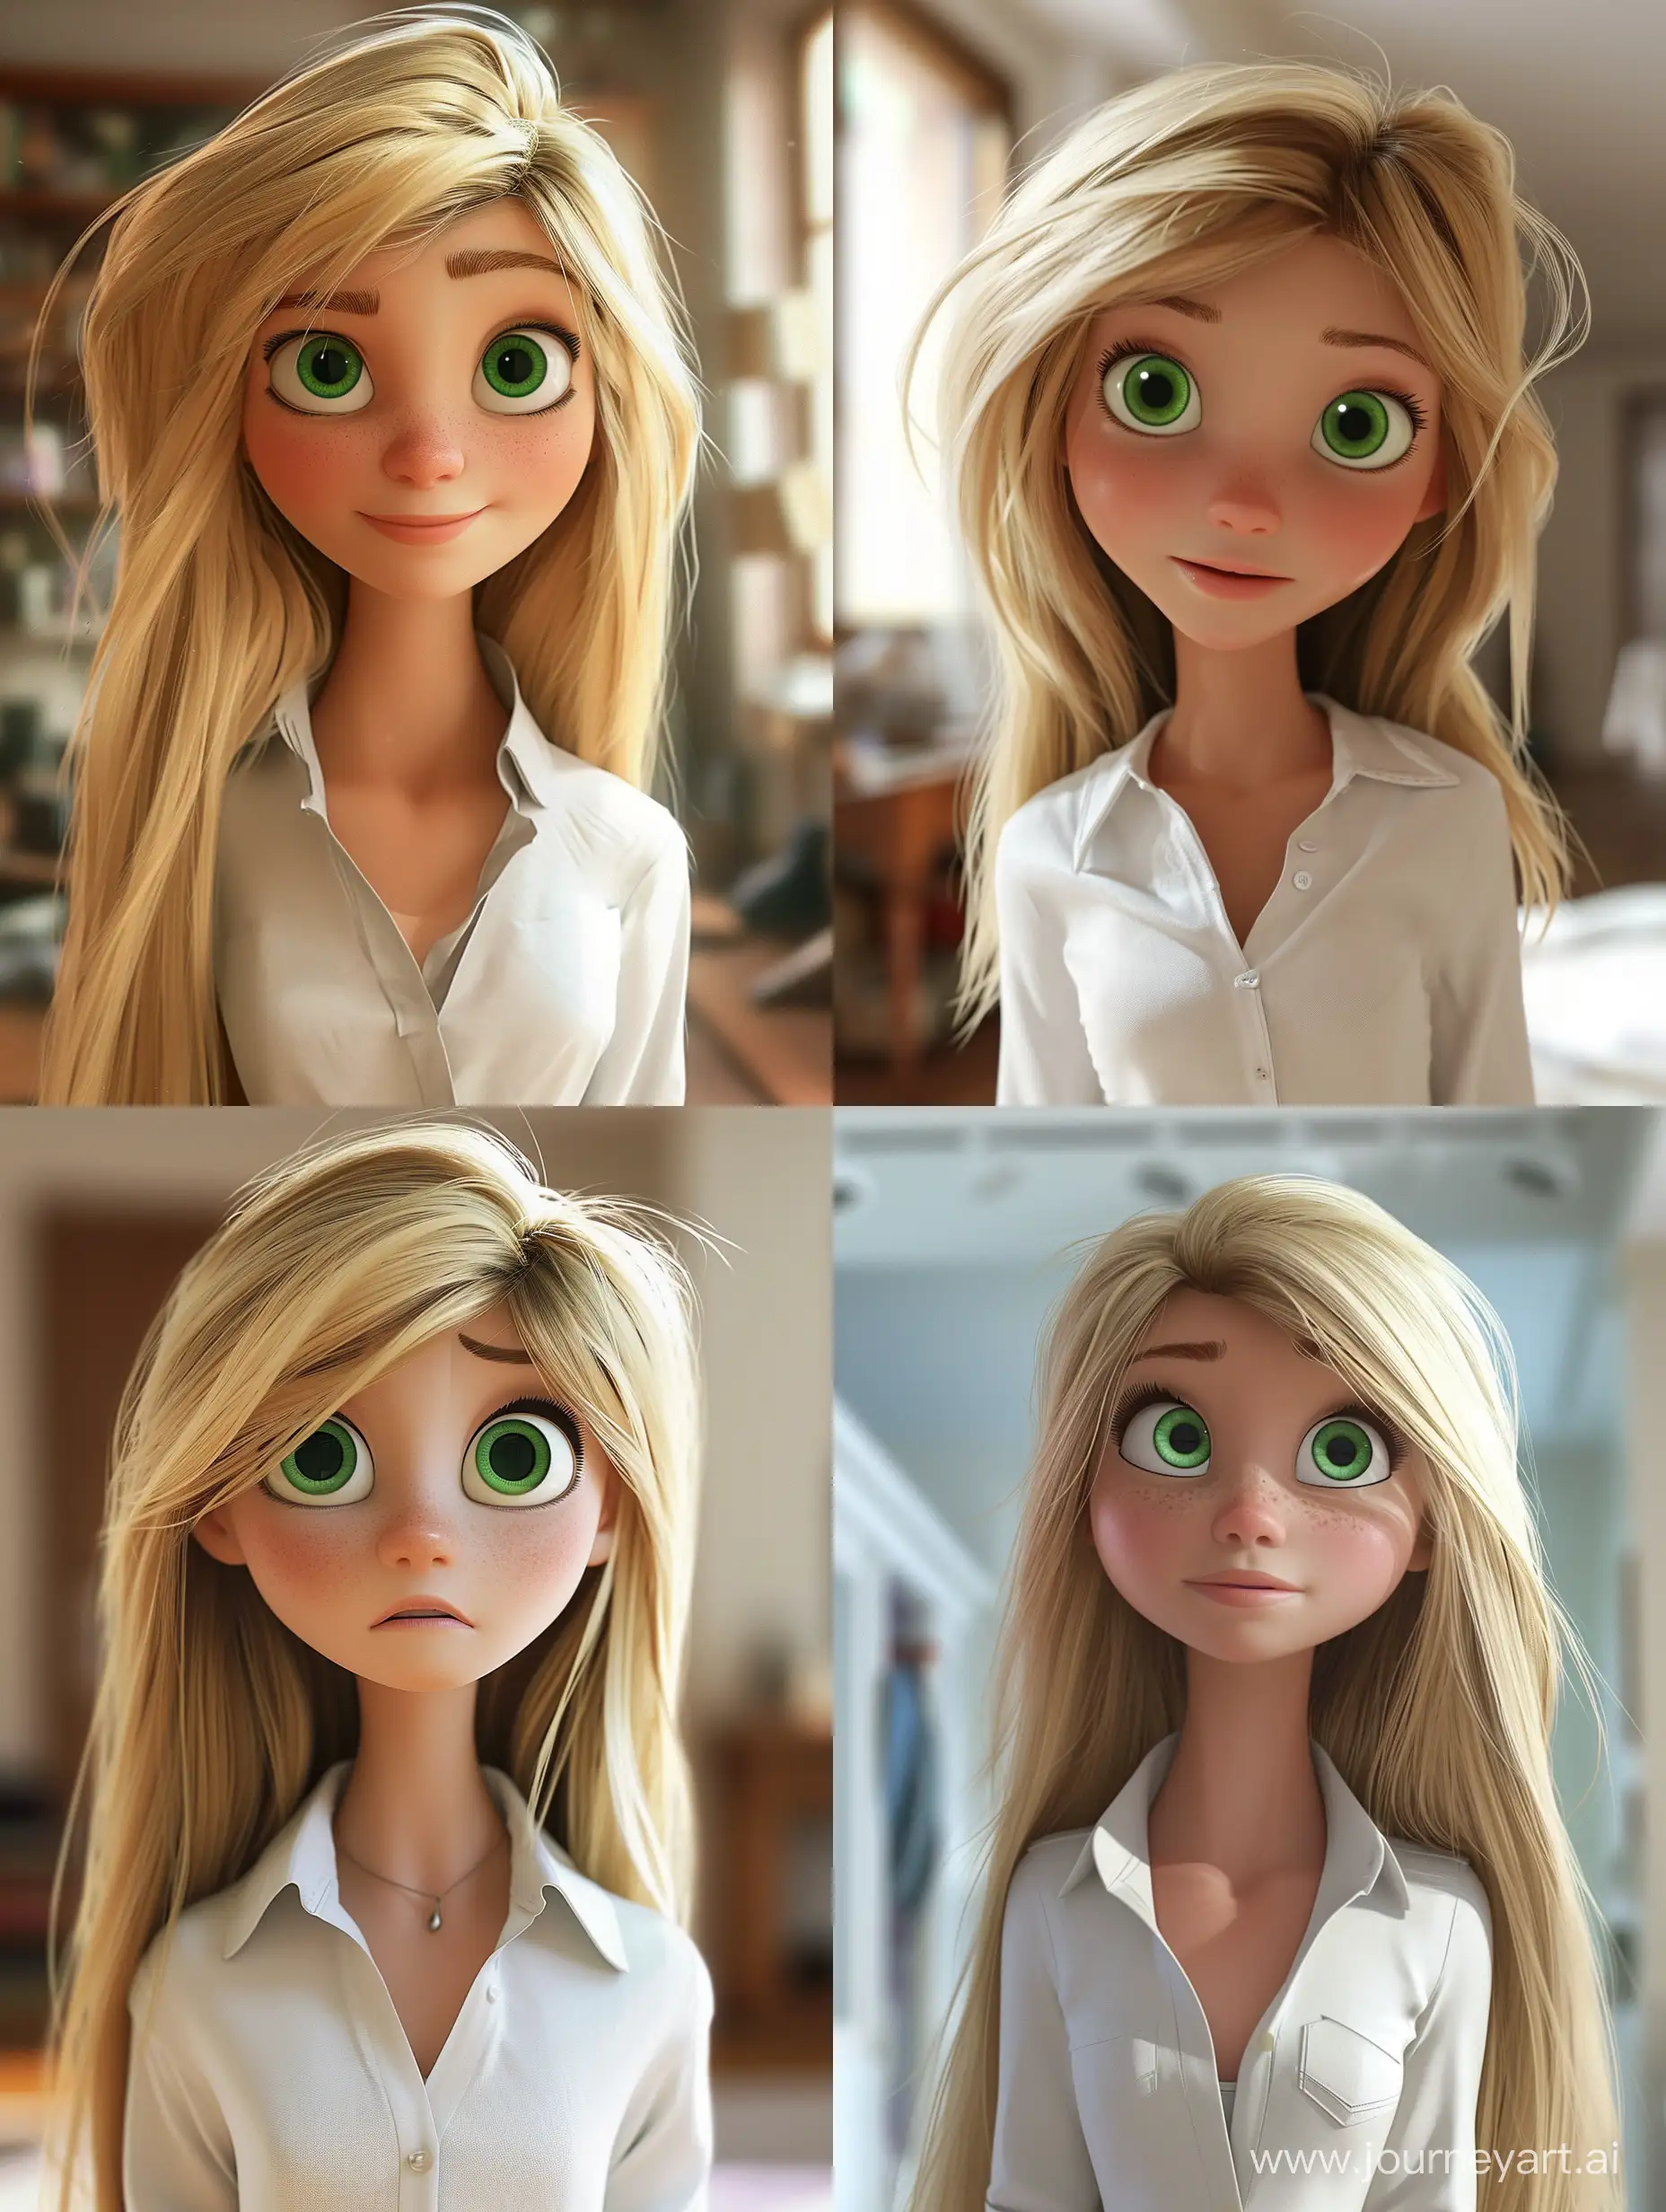 Adorable-Blonde-Girl-in-Pixar-Animation-Style-with-Green-Eyes